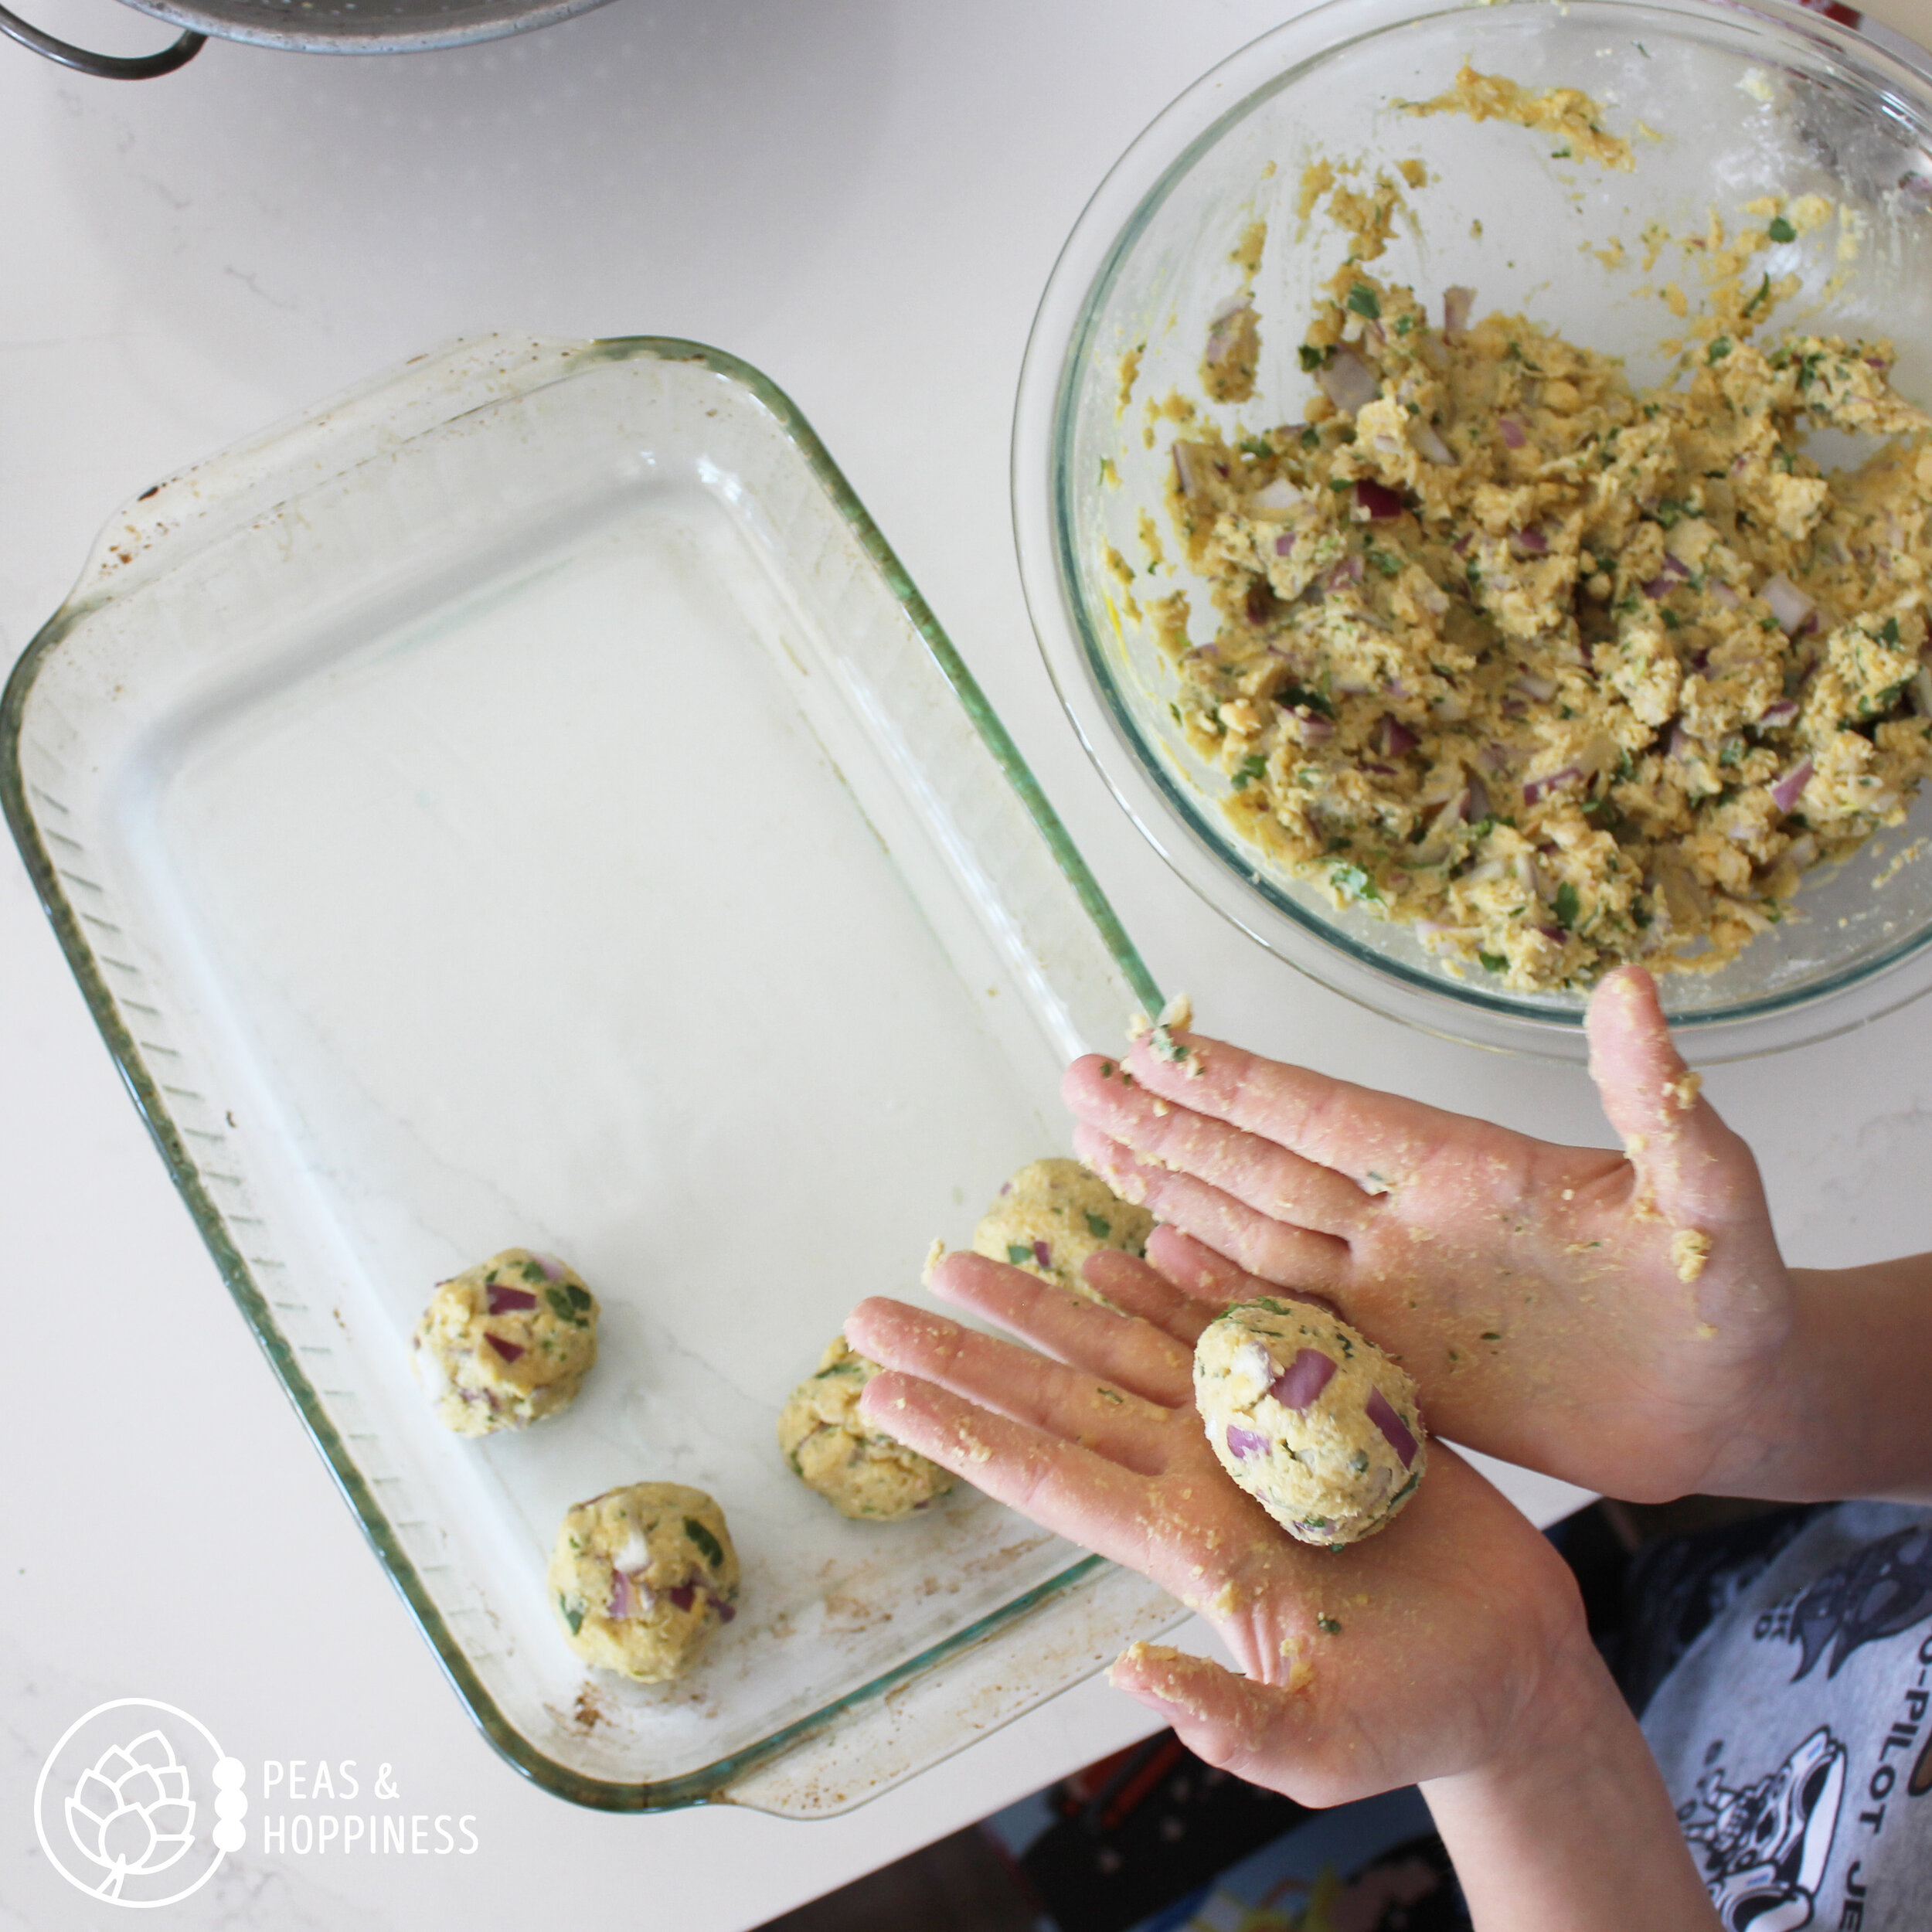 Recipes are clearly written with step-by-step instructions which make it easy to get kids involved and make beginner cooks feel confident in the kitchen